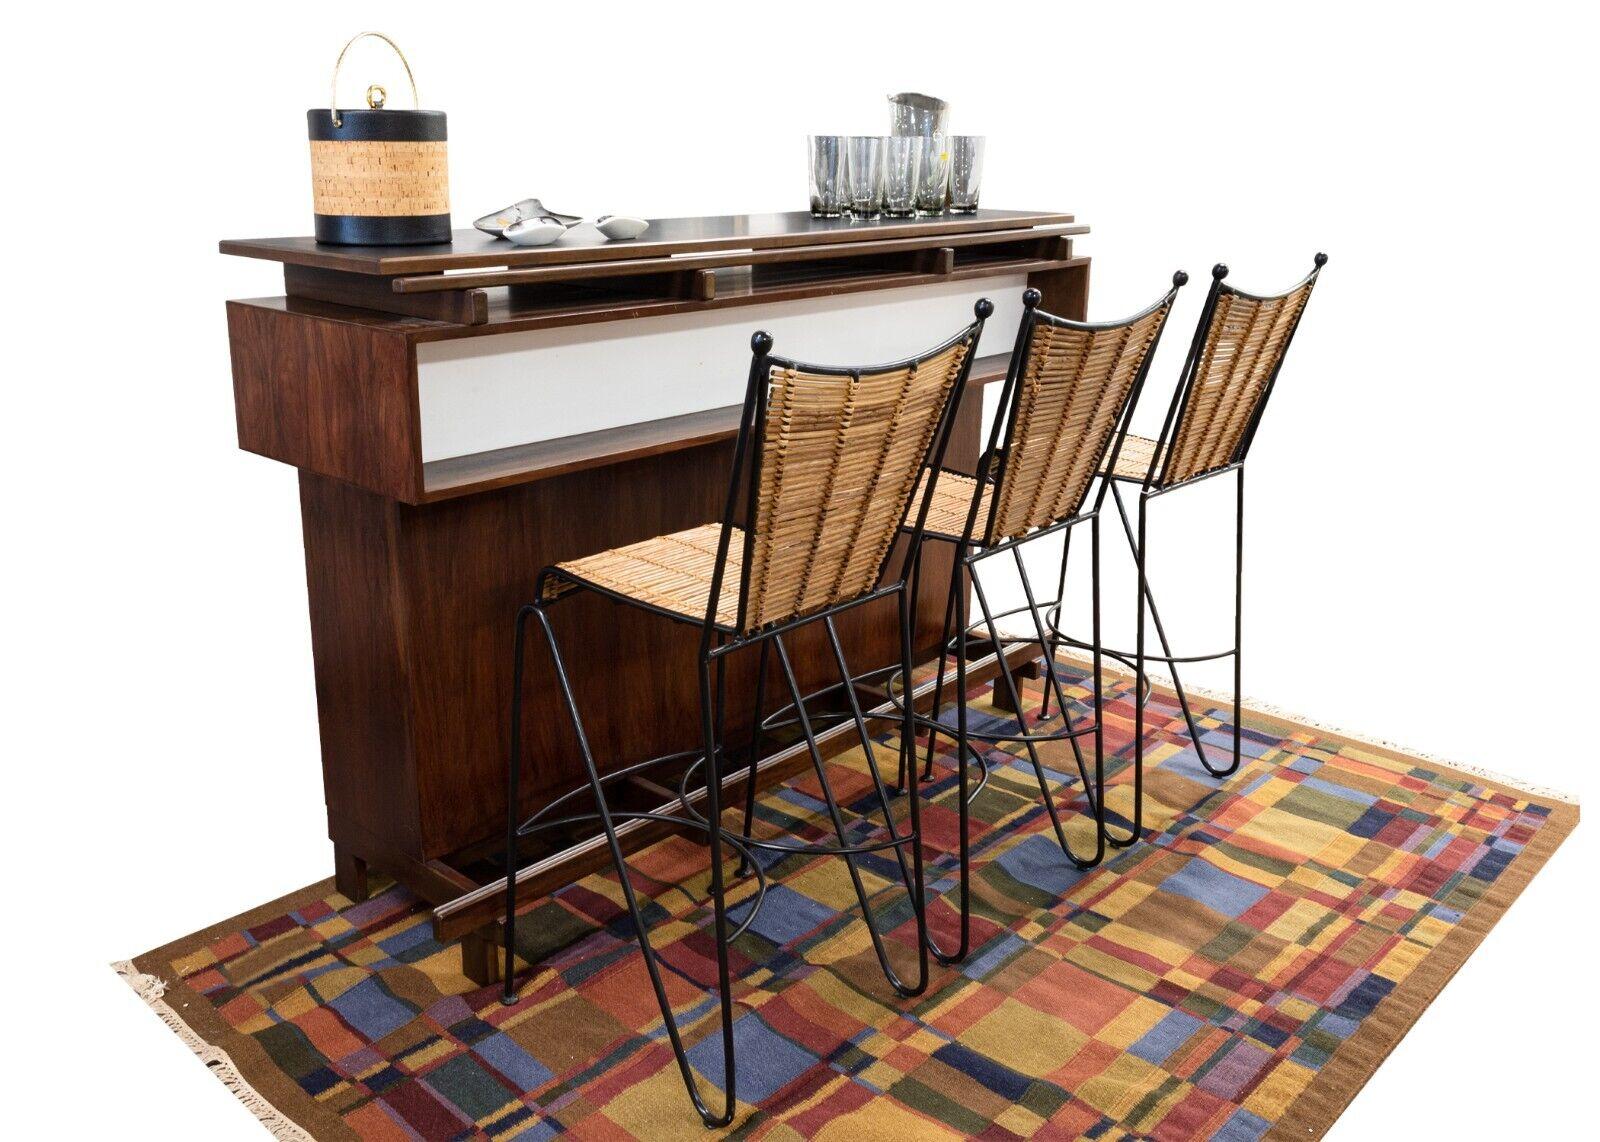 A rosewood dry bar from Erik Buch for Dyrlund Denmark. A truly fantastic mid century modern bar for any MCM home. This wonderful piece features Danish design from Erik Buch. This piece is constructed with primarily rosewood, which has such deep,